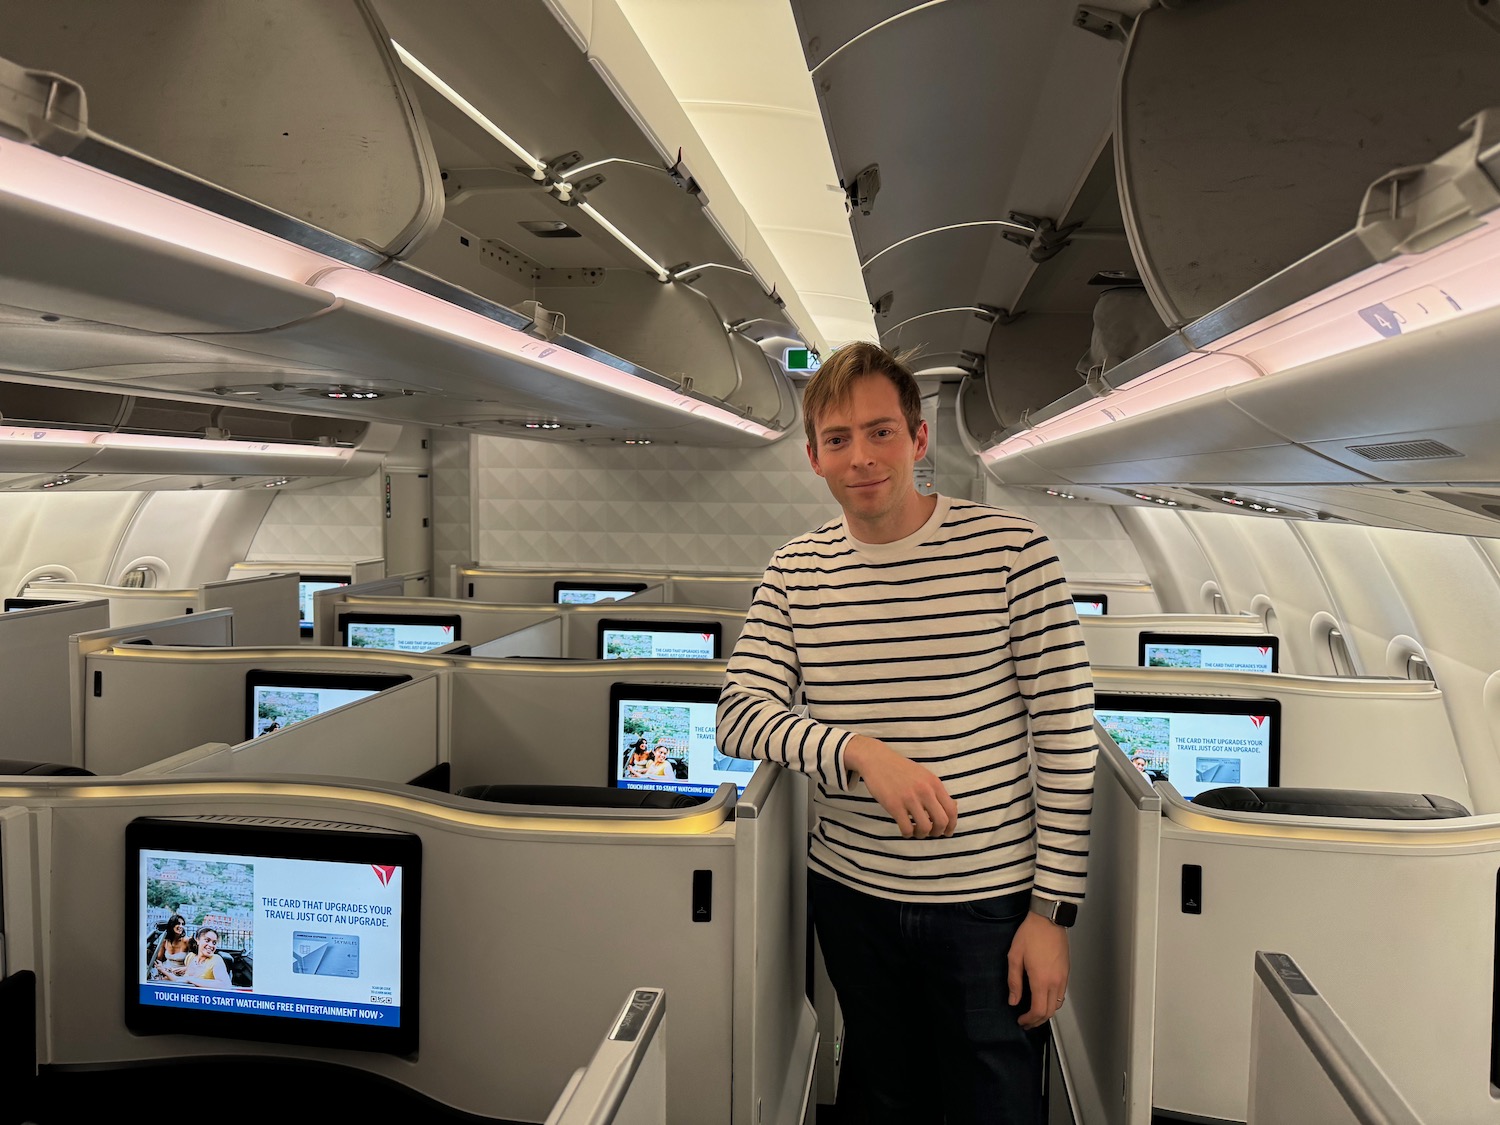 a man standing in an airplane with rows of screens